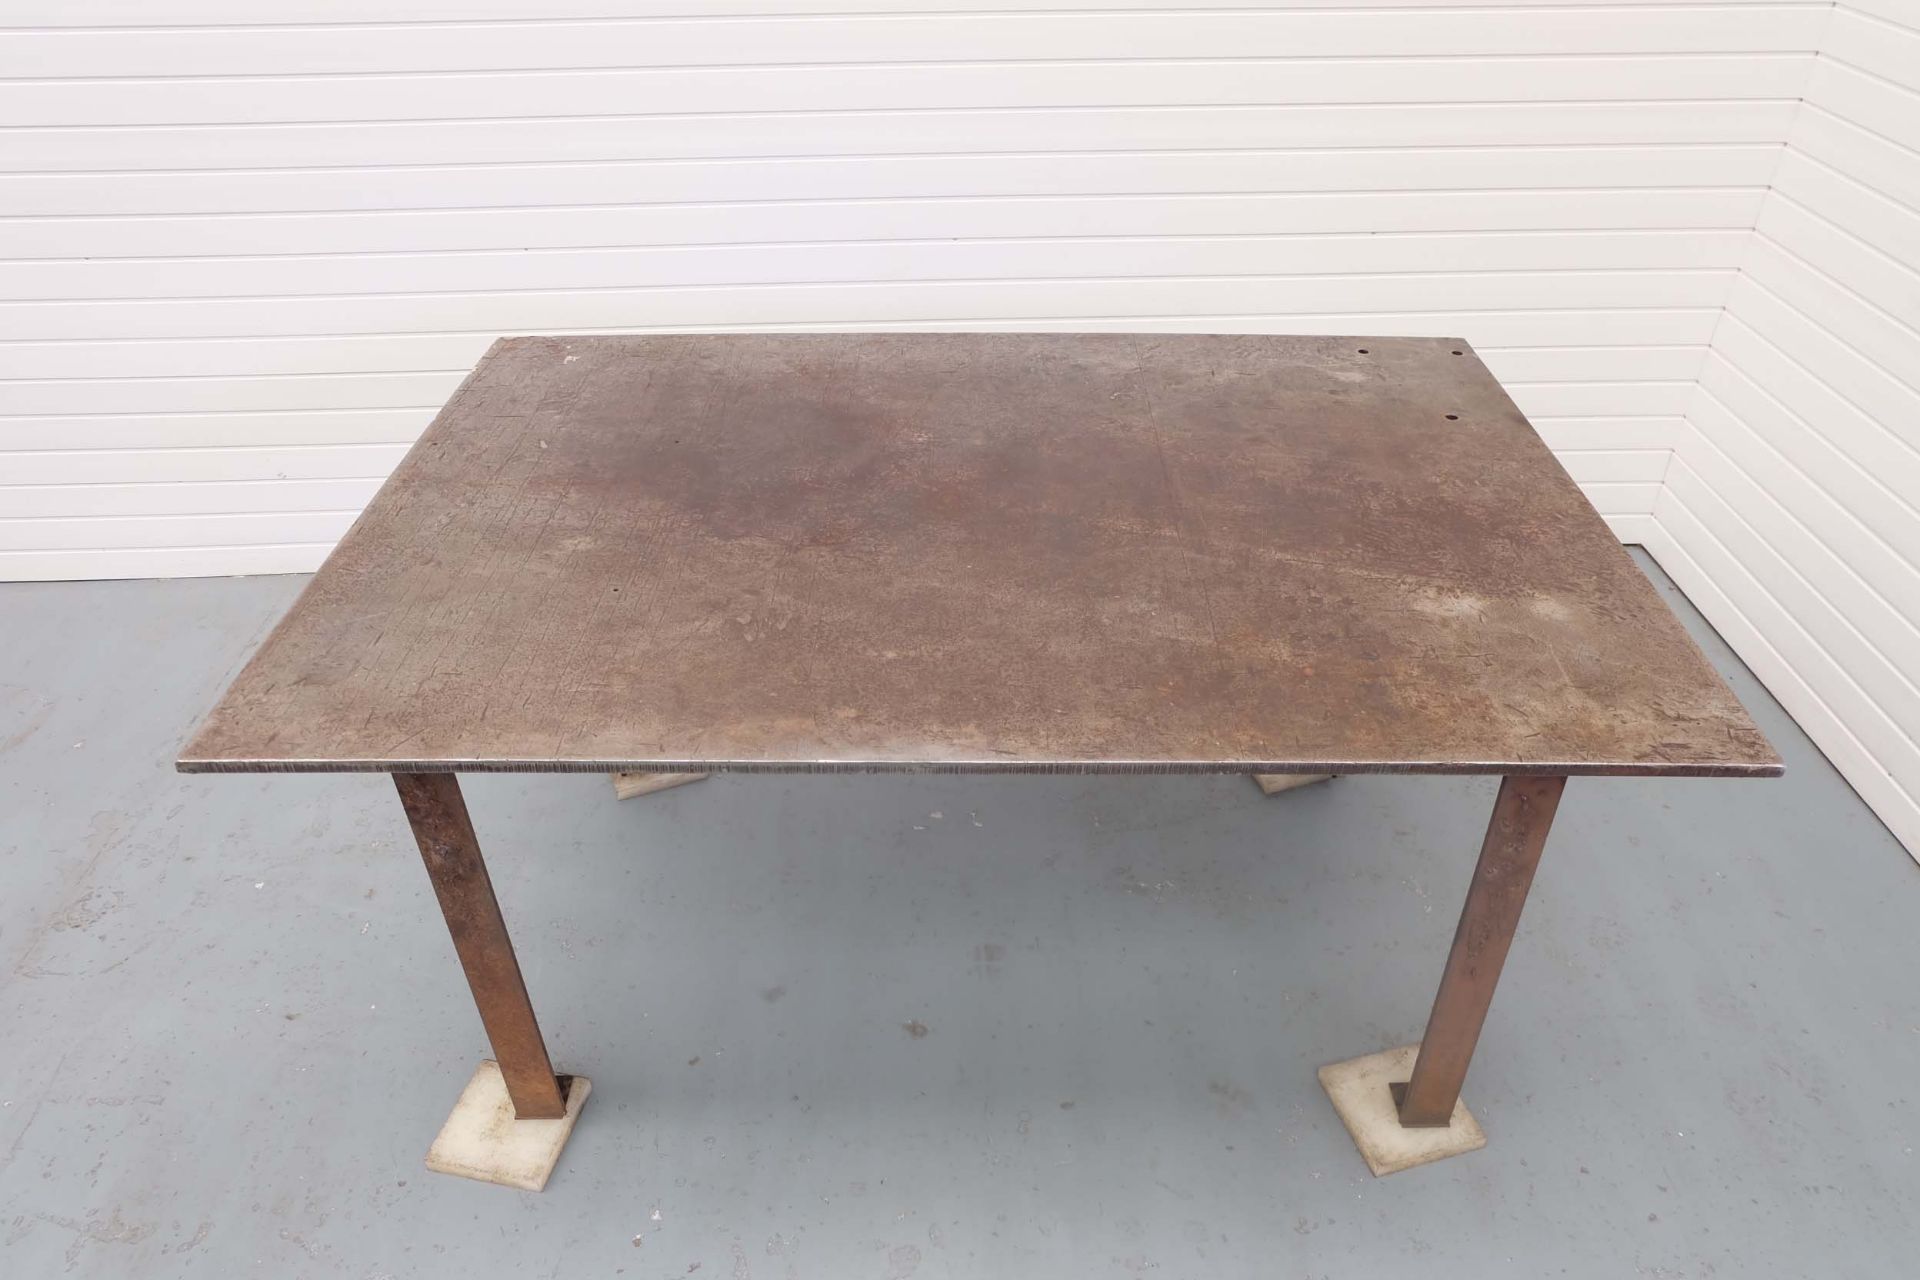 Steel Table For Welding Etc. Size 6' x 4. Thickness 3/4". Work Height 36". - Image 3 of 5